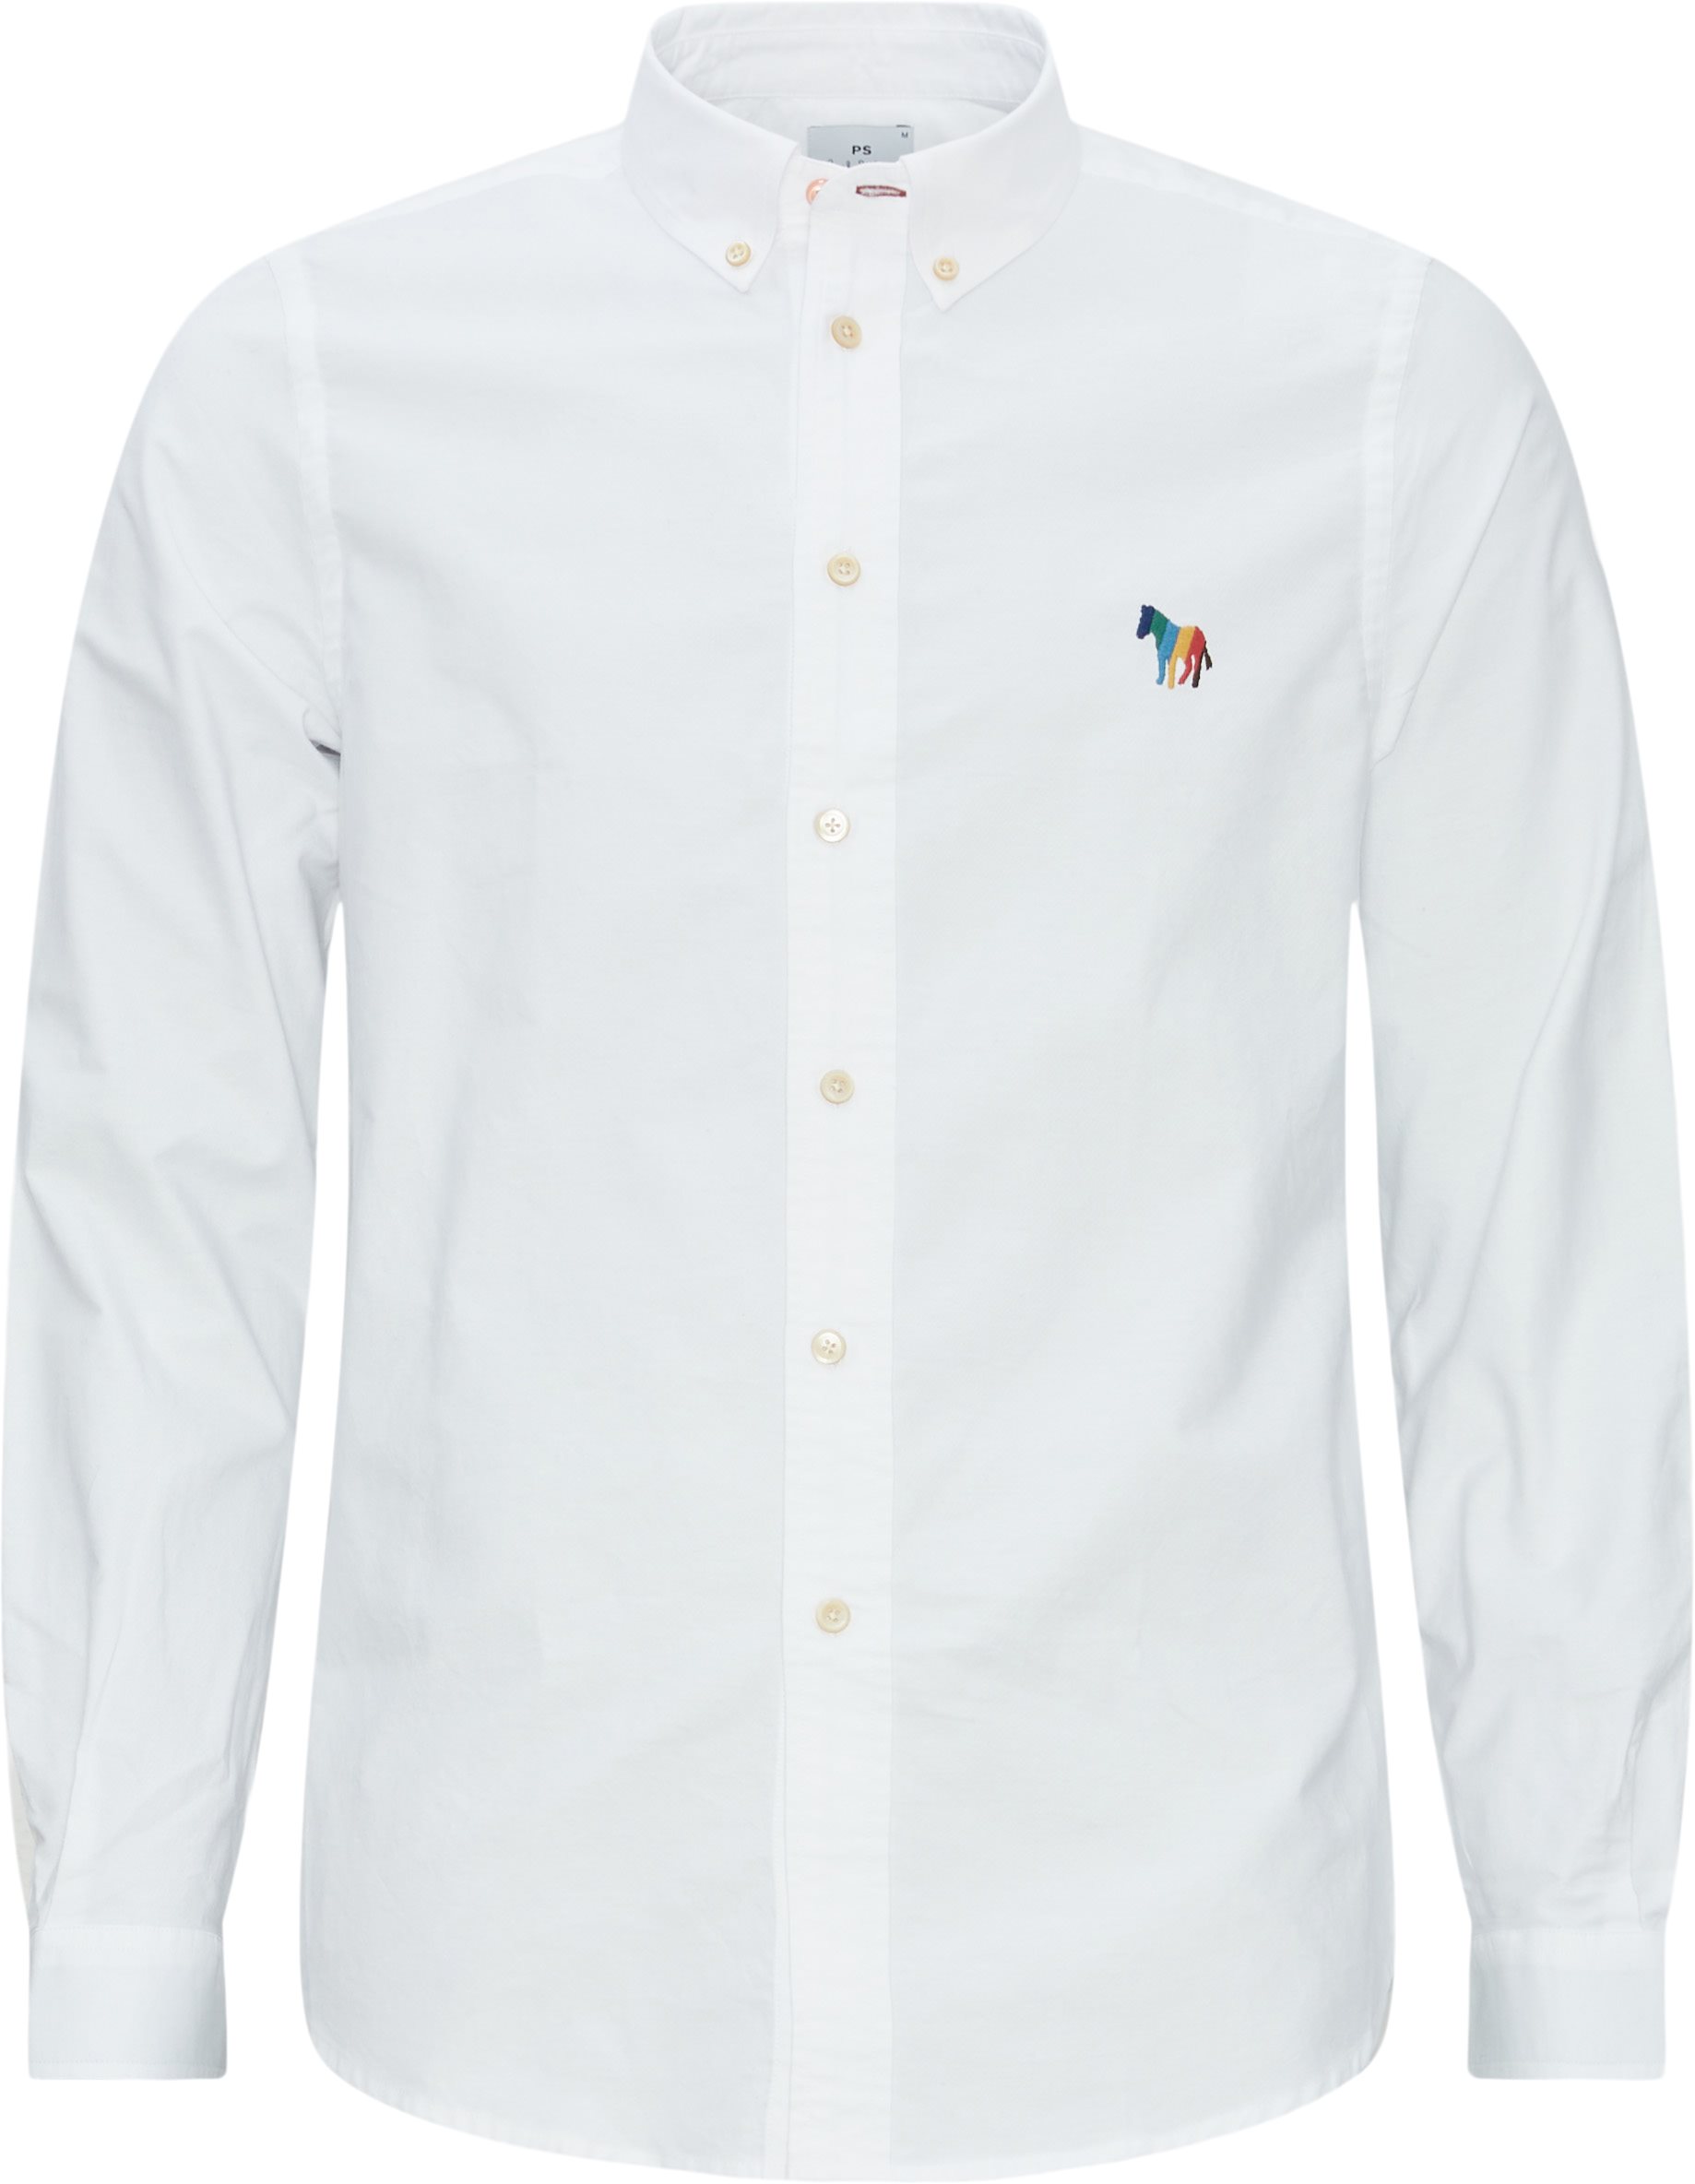 PS Paul Smith Shirts 599R M21950 White